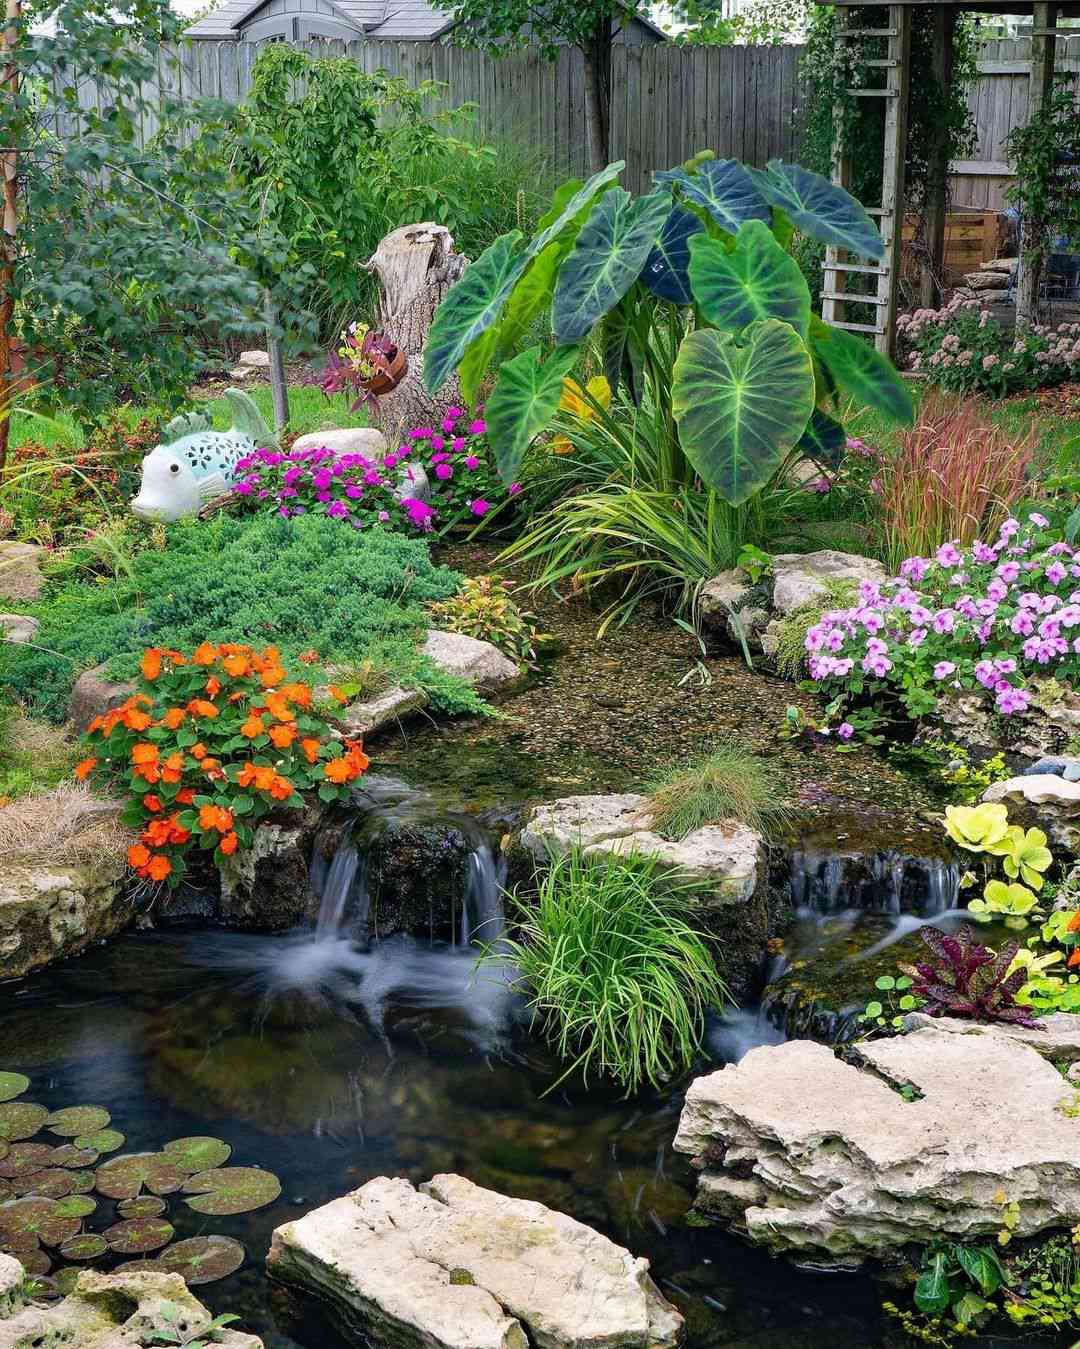 Add charm to your garden by adding a pretty small pond